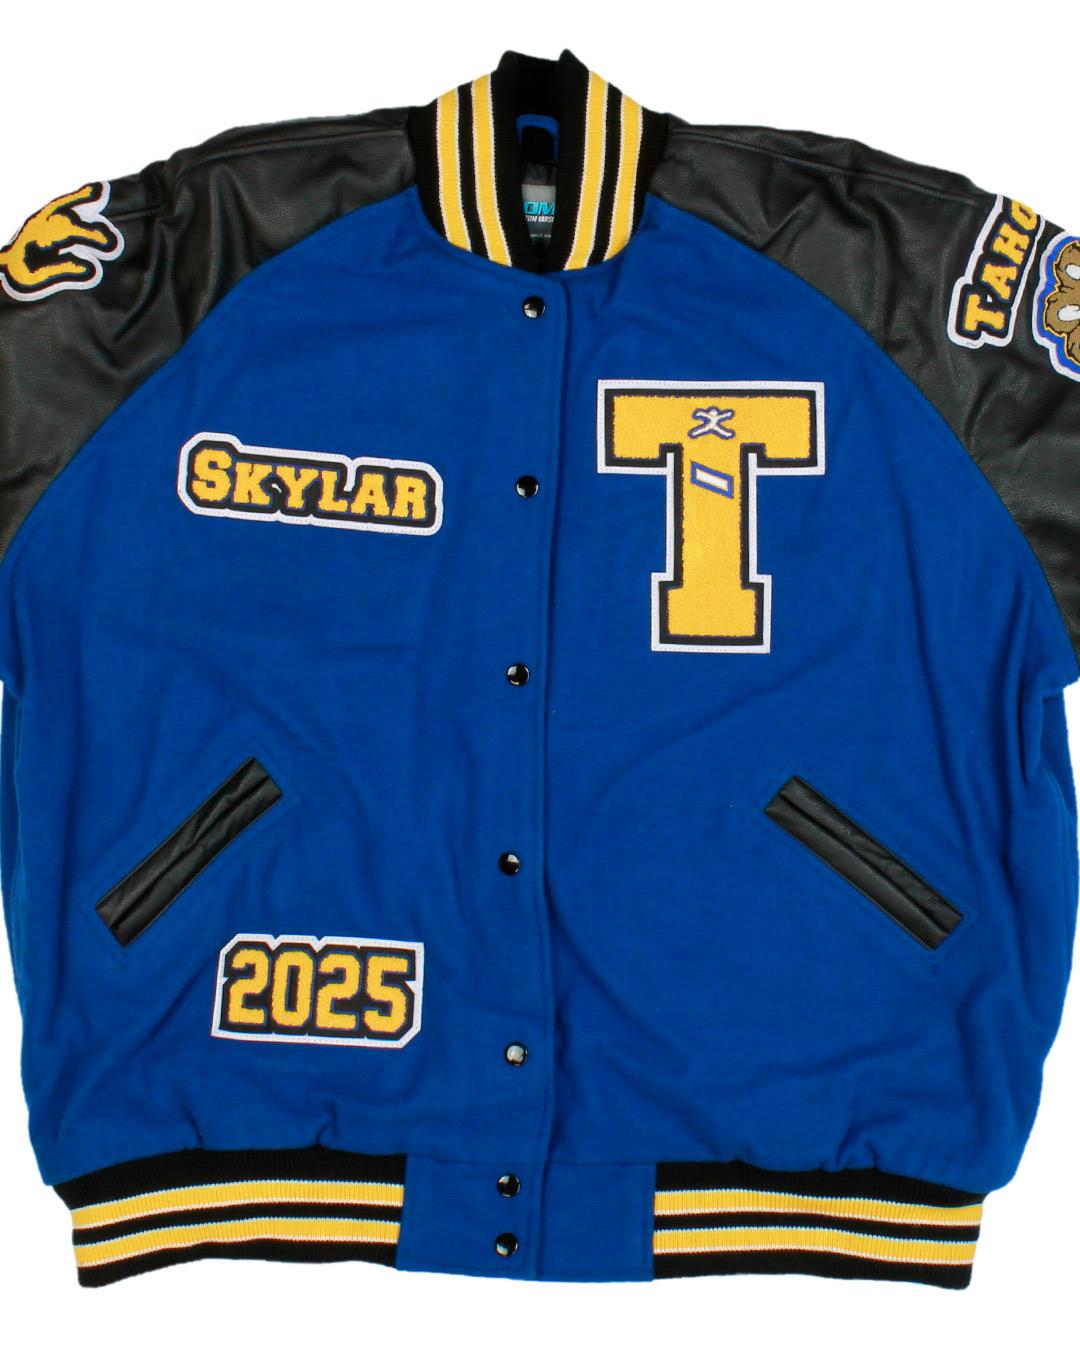 Tahoma High School Letter Jacket, Maple Valley, WA - Front